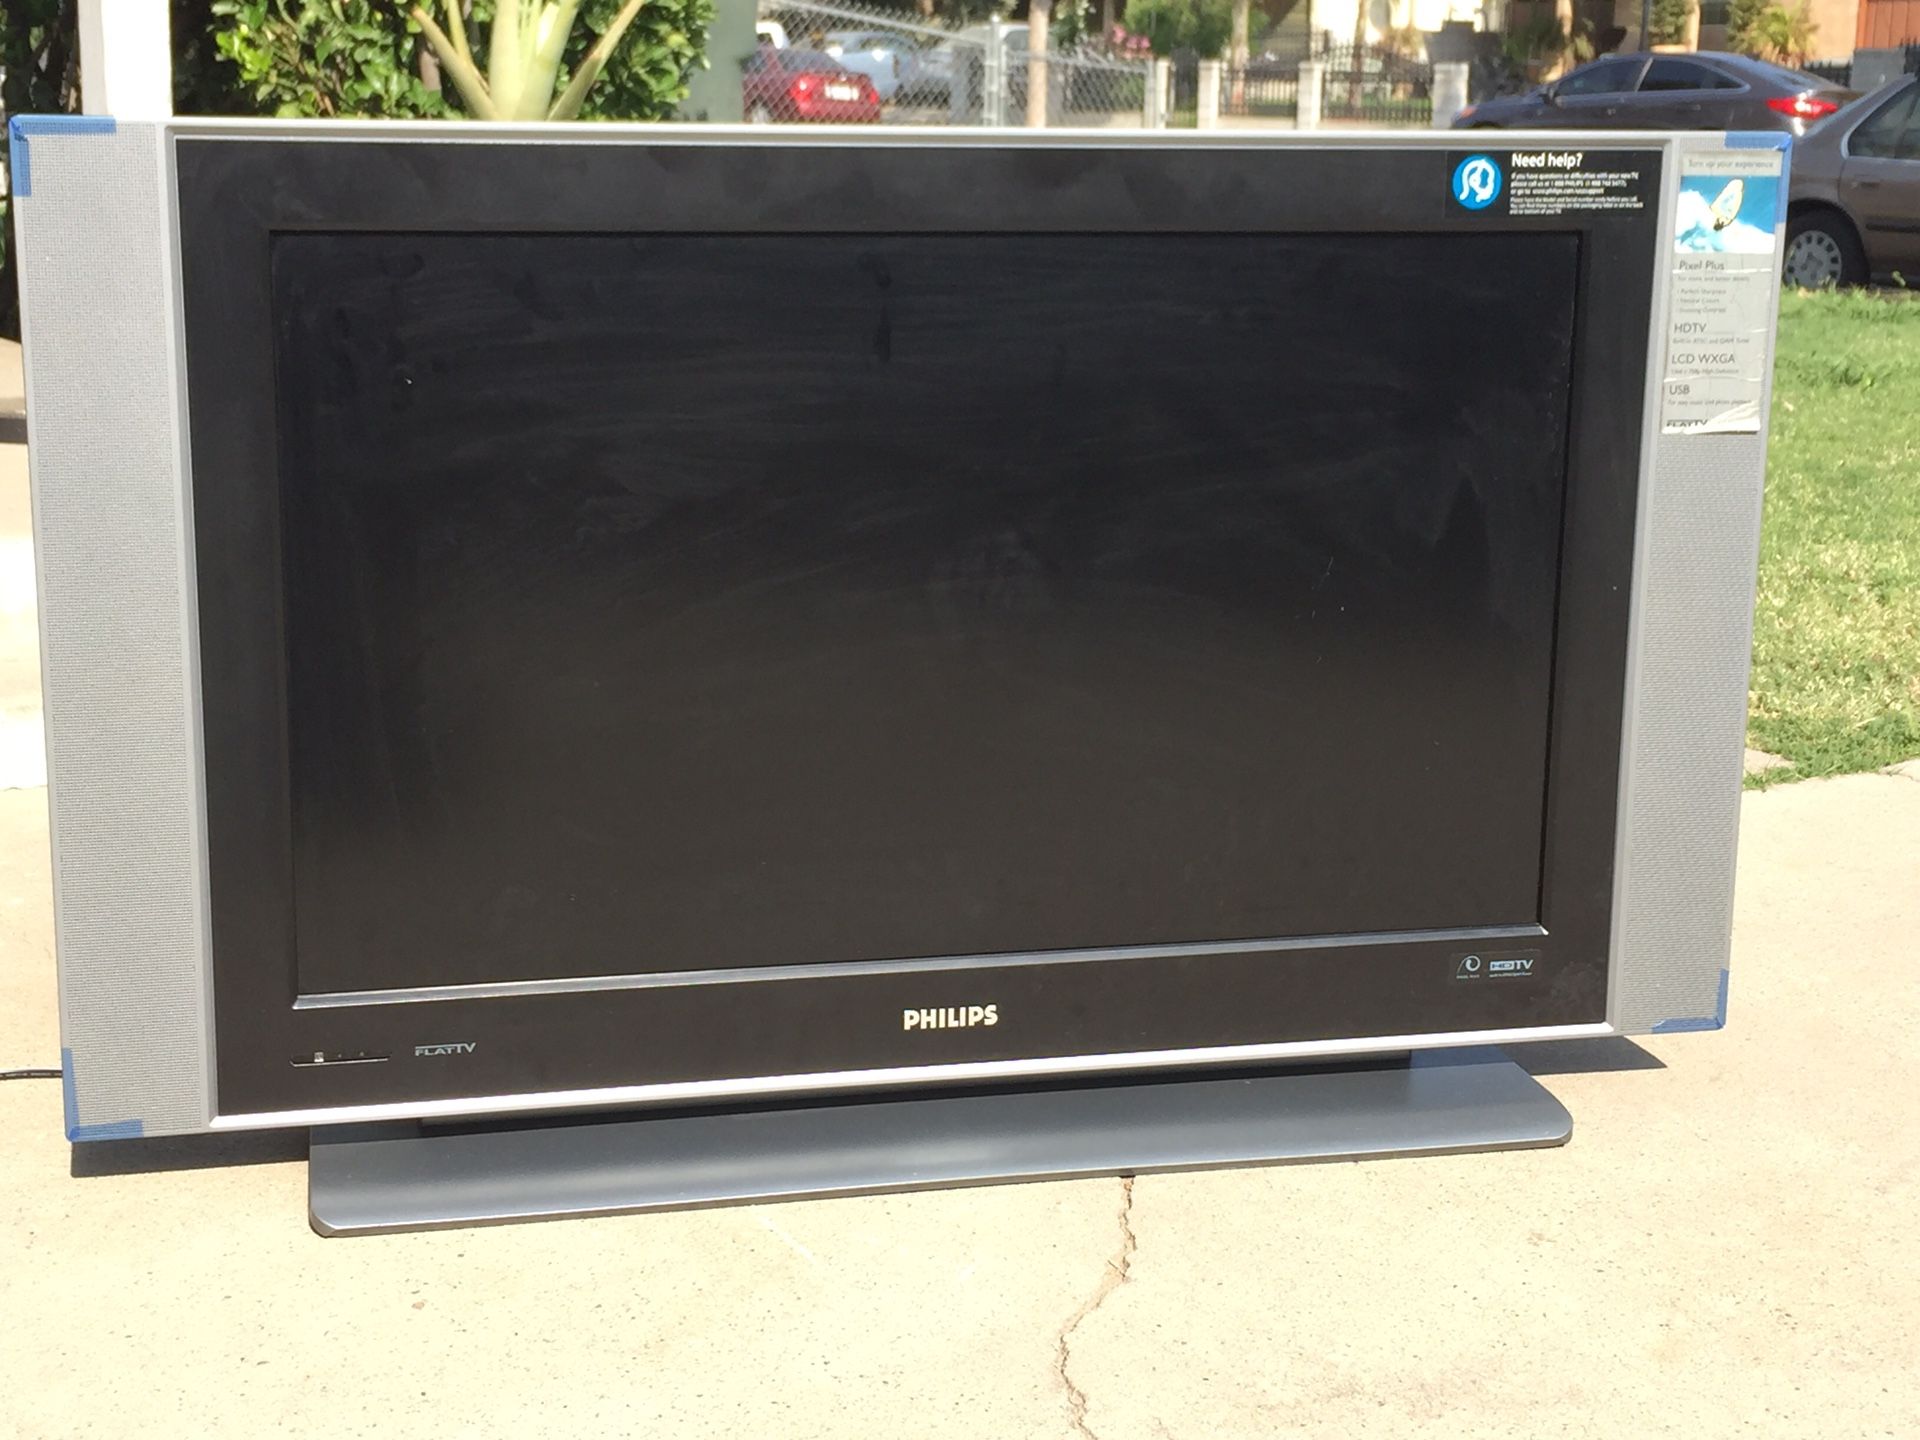 Philips 37Inch LCD TV. Condition is Used. Tv' work great, come with remote control.